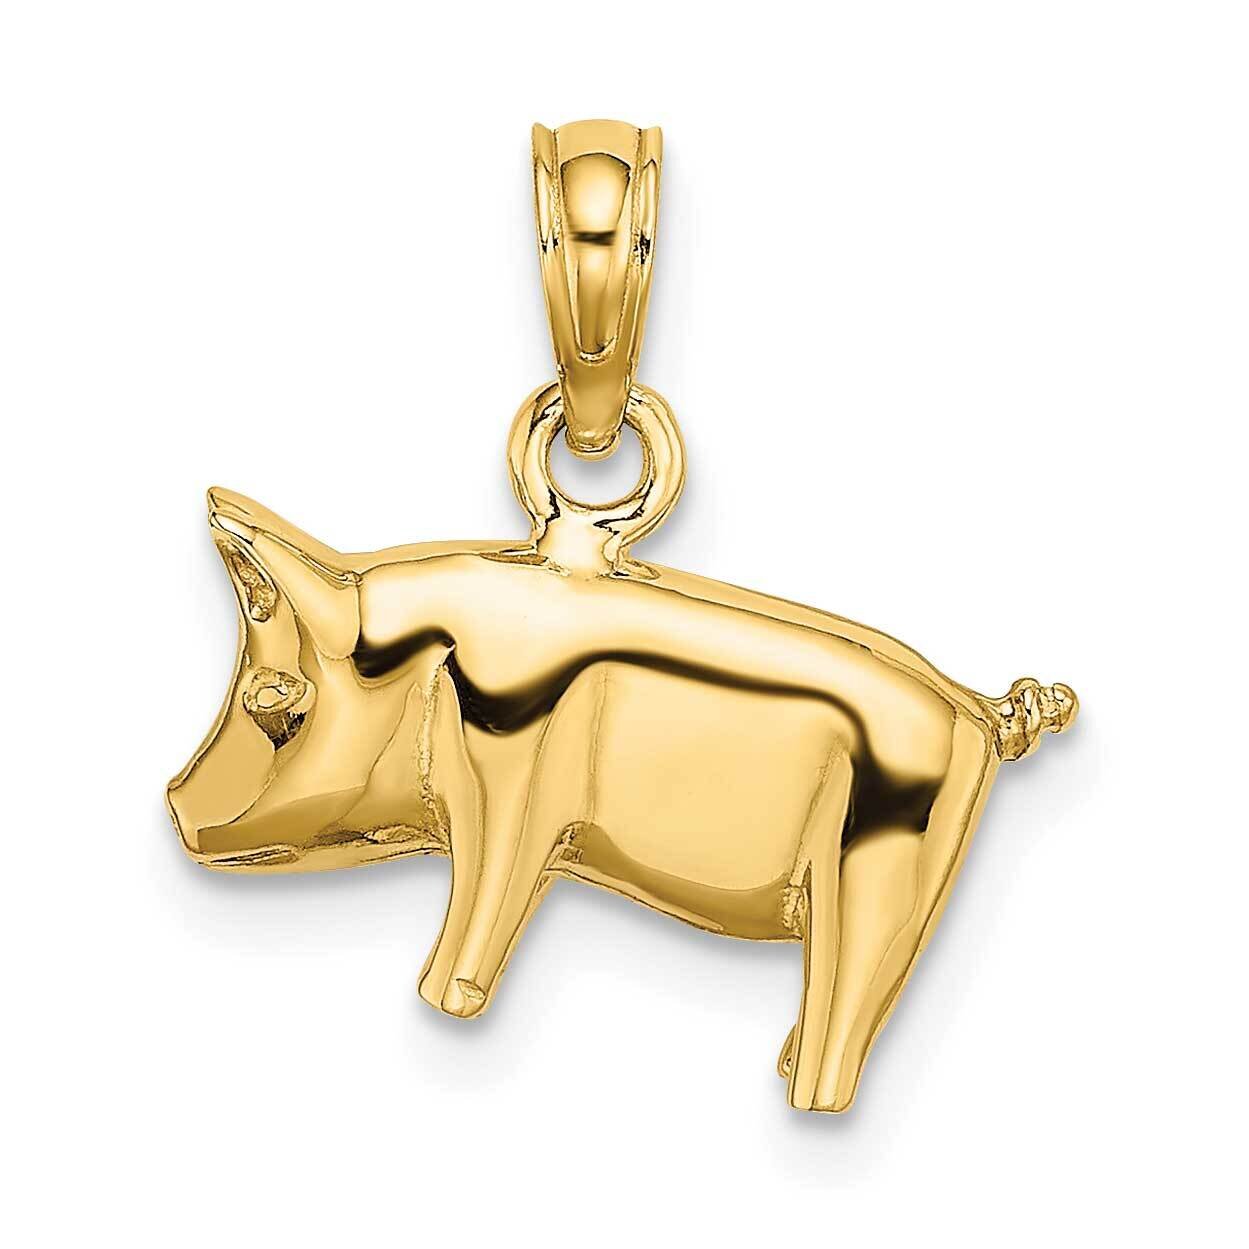 Pig with Curly Tail Charm 14k Gold 3-D Polished K6465